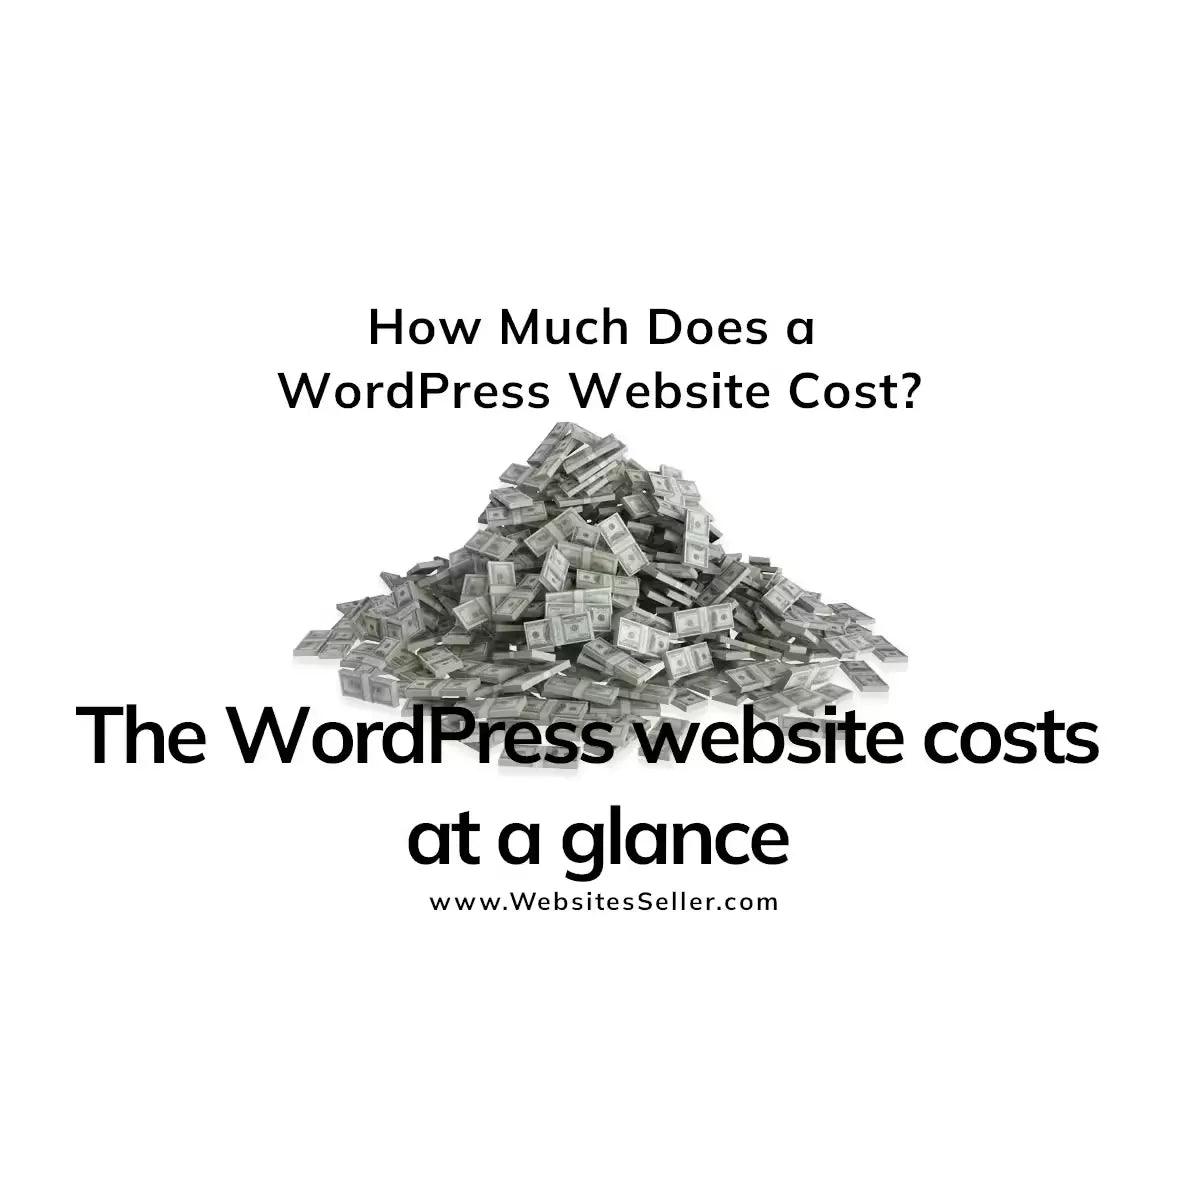 How Much Does a WordPress Website Cost?